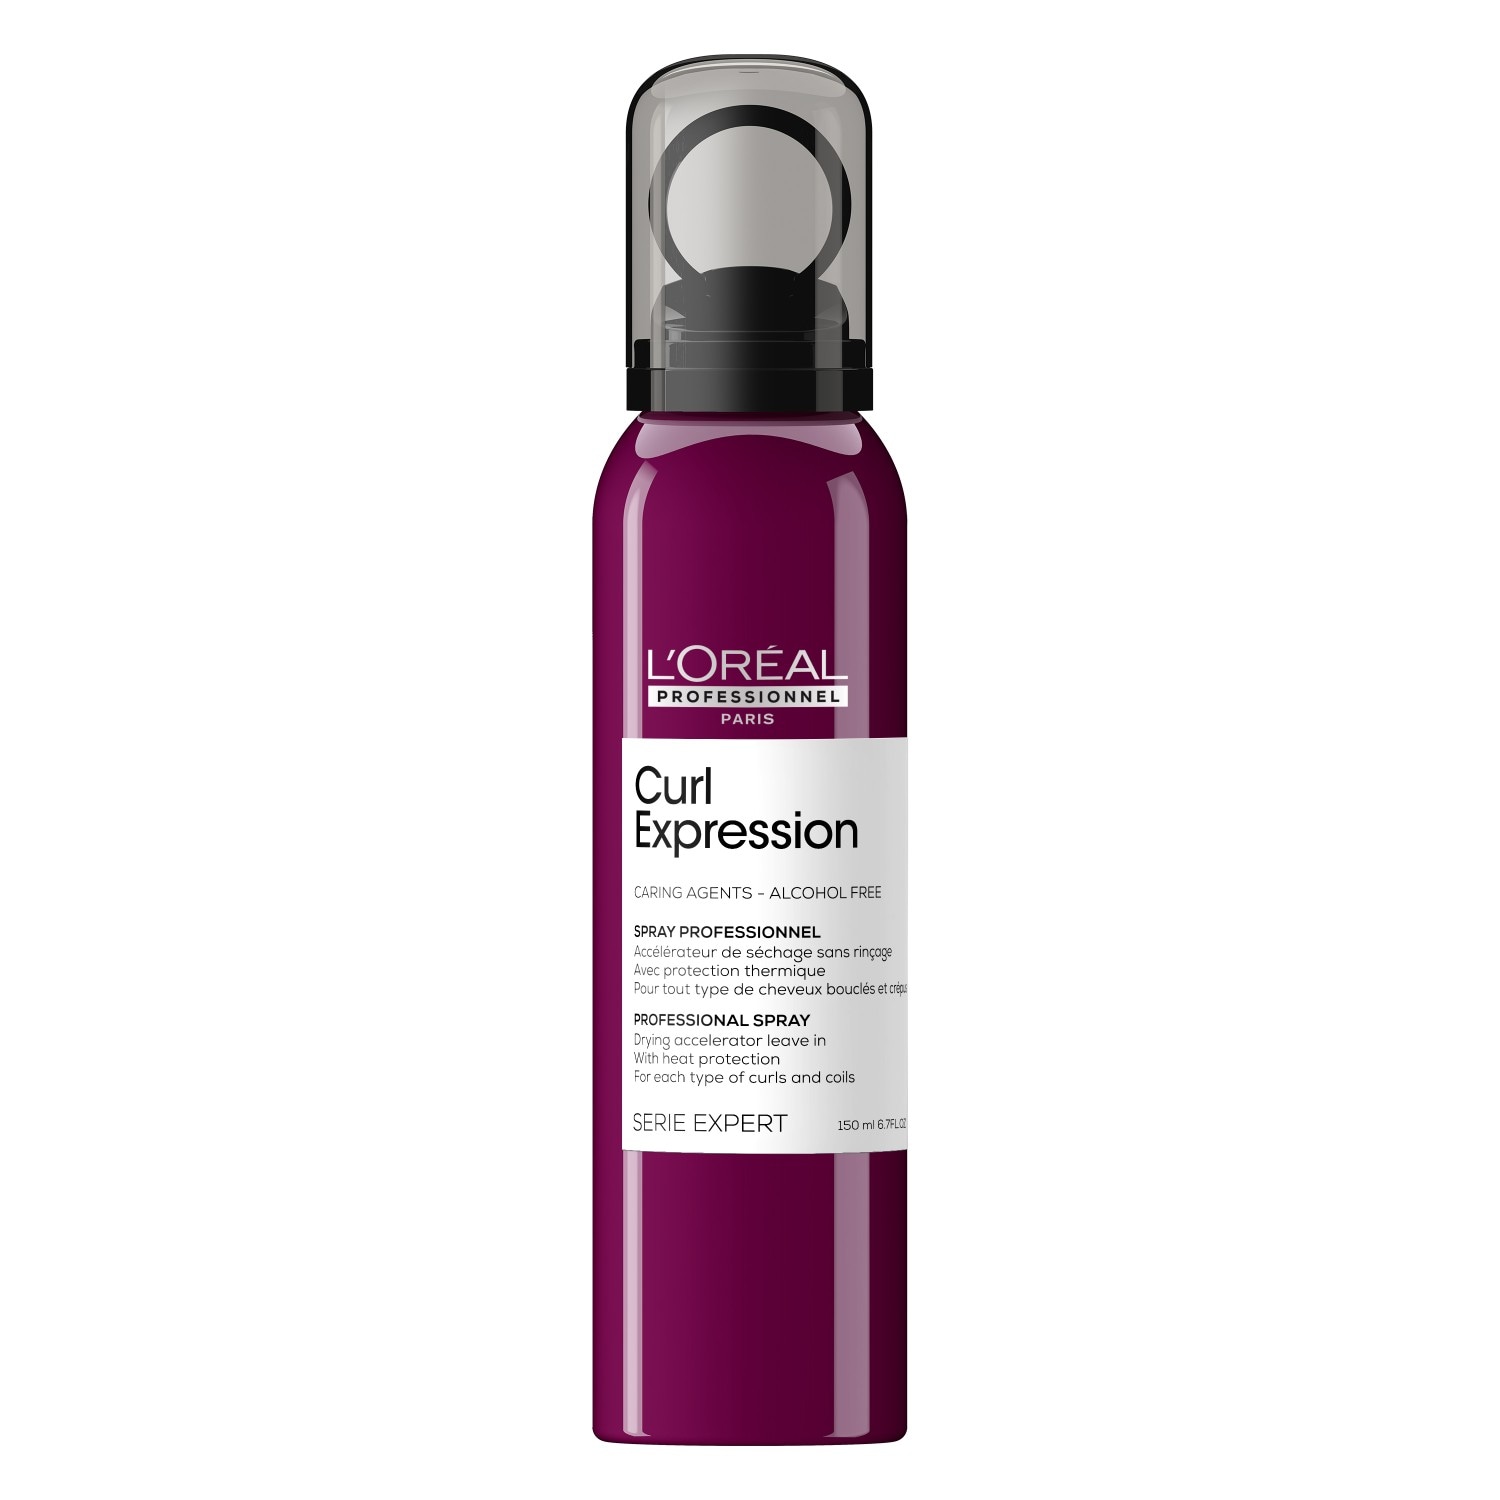 L´Oréal Professionnel Paris Serie Expert Curl Expression Drying Accelerator Leave-In